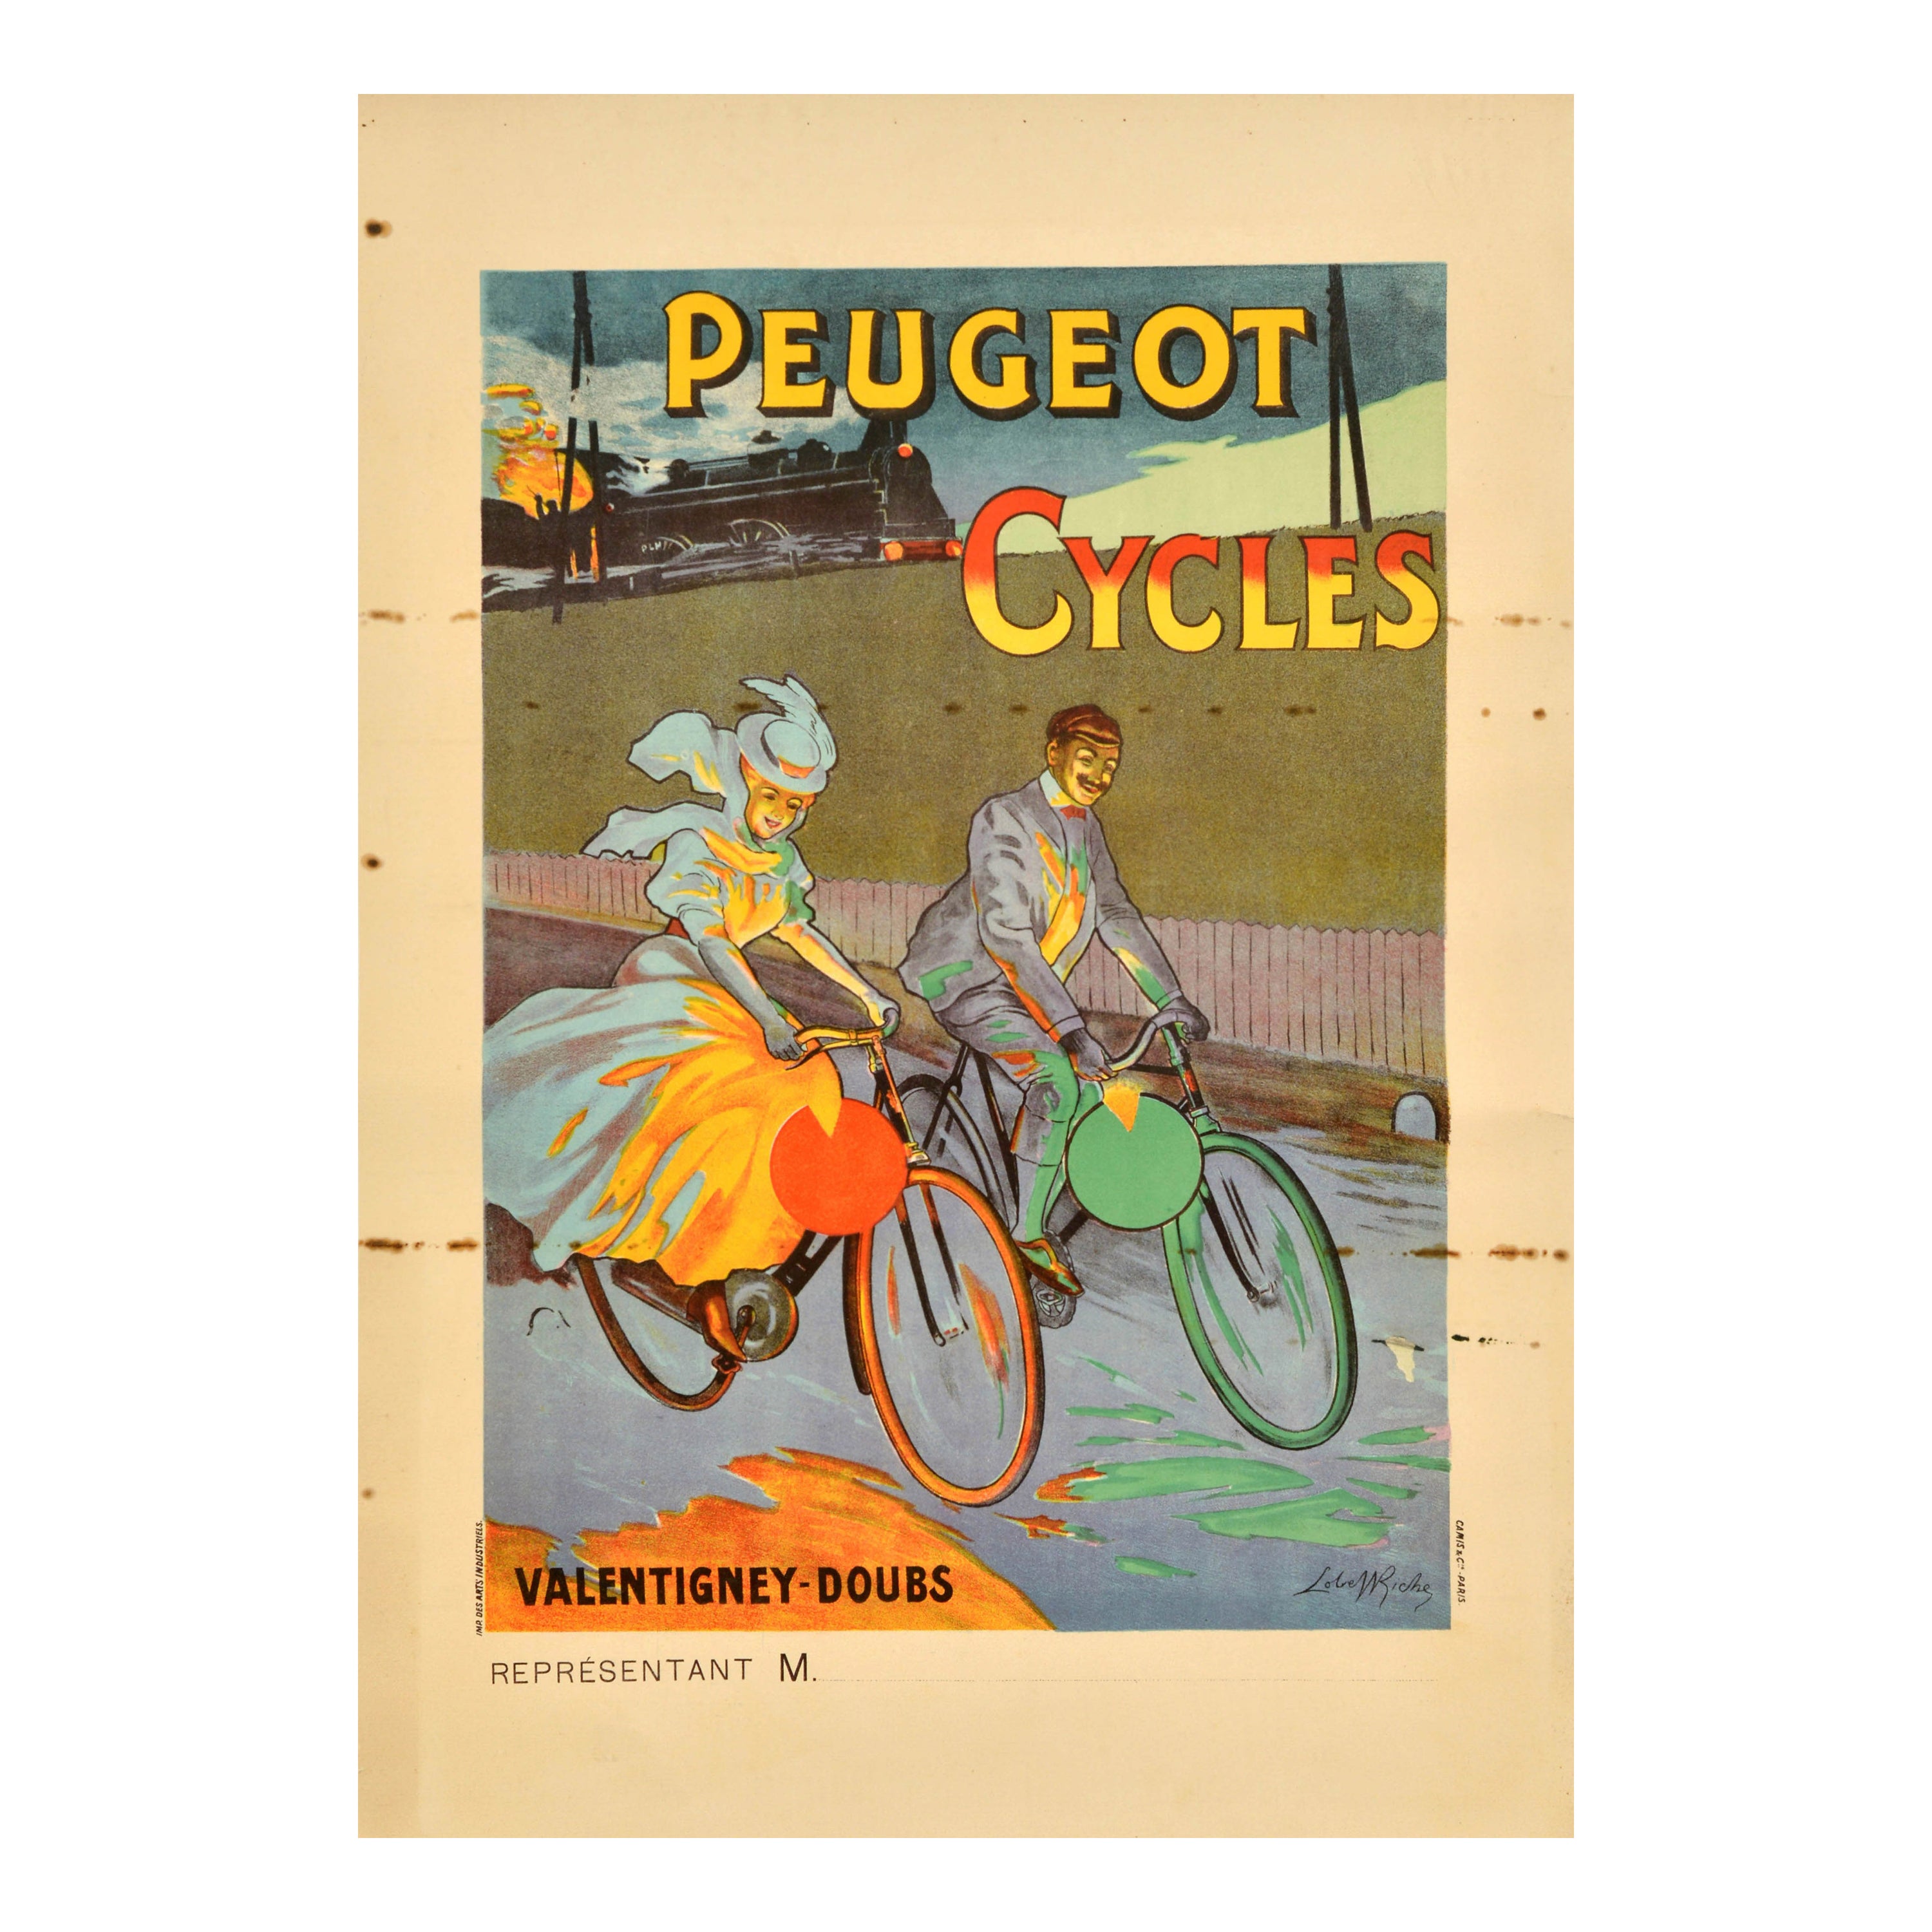 Original Antique Bicycle Advertising Poster Peugeot Cycles Valentigney Doubs For Sale